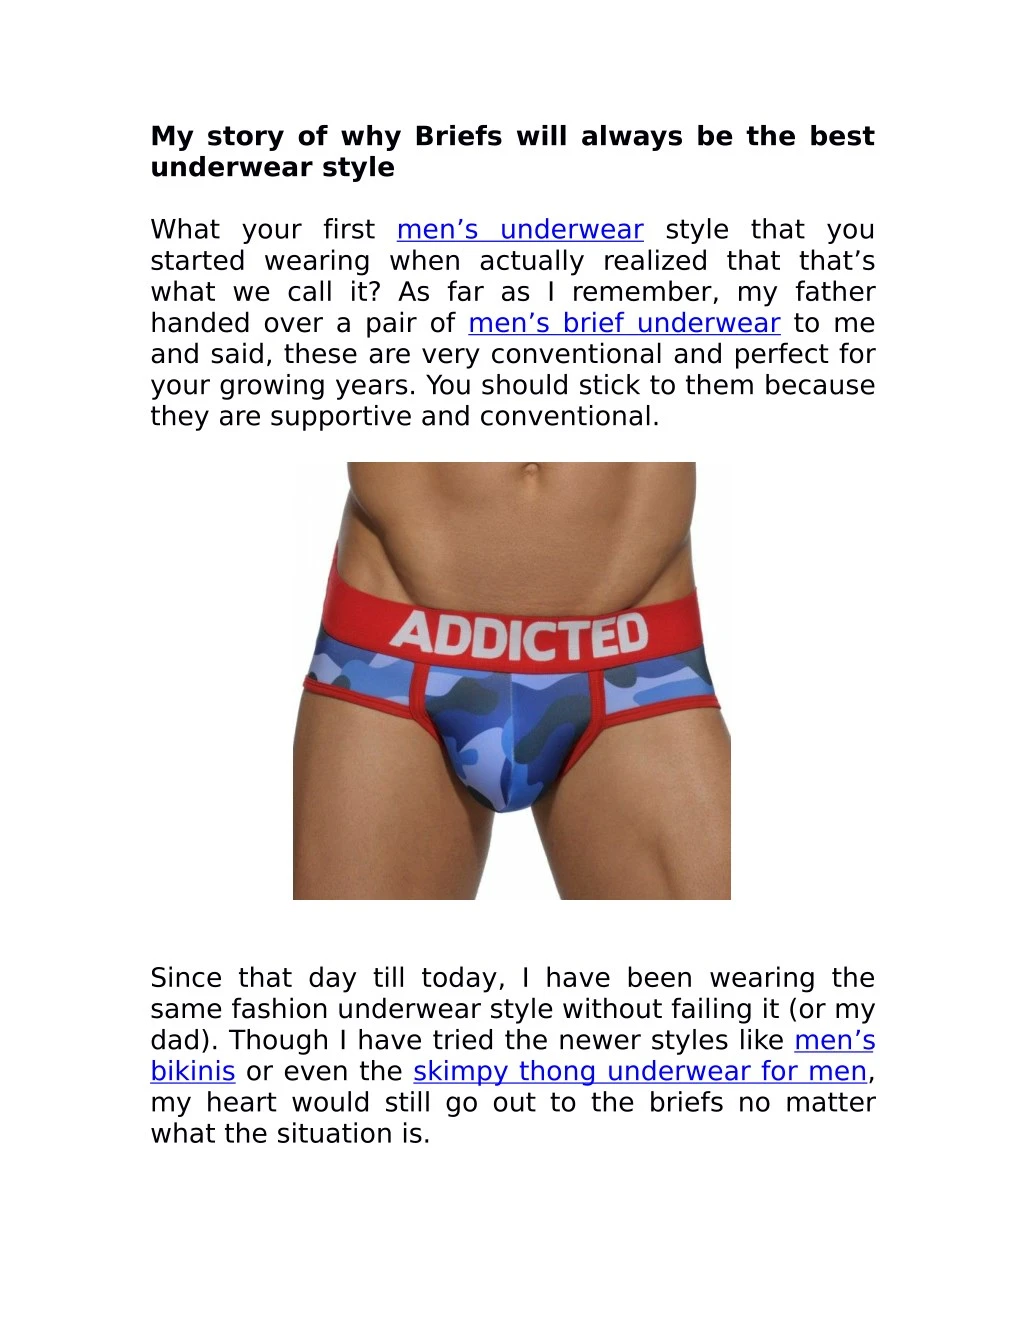 my story of why briefs will always be the best